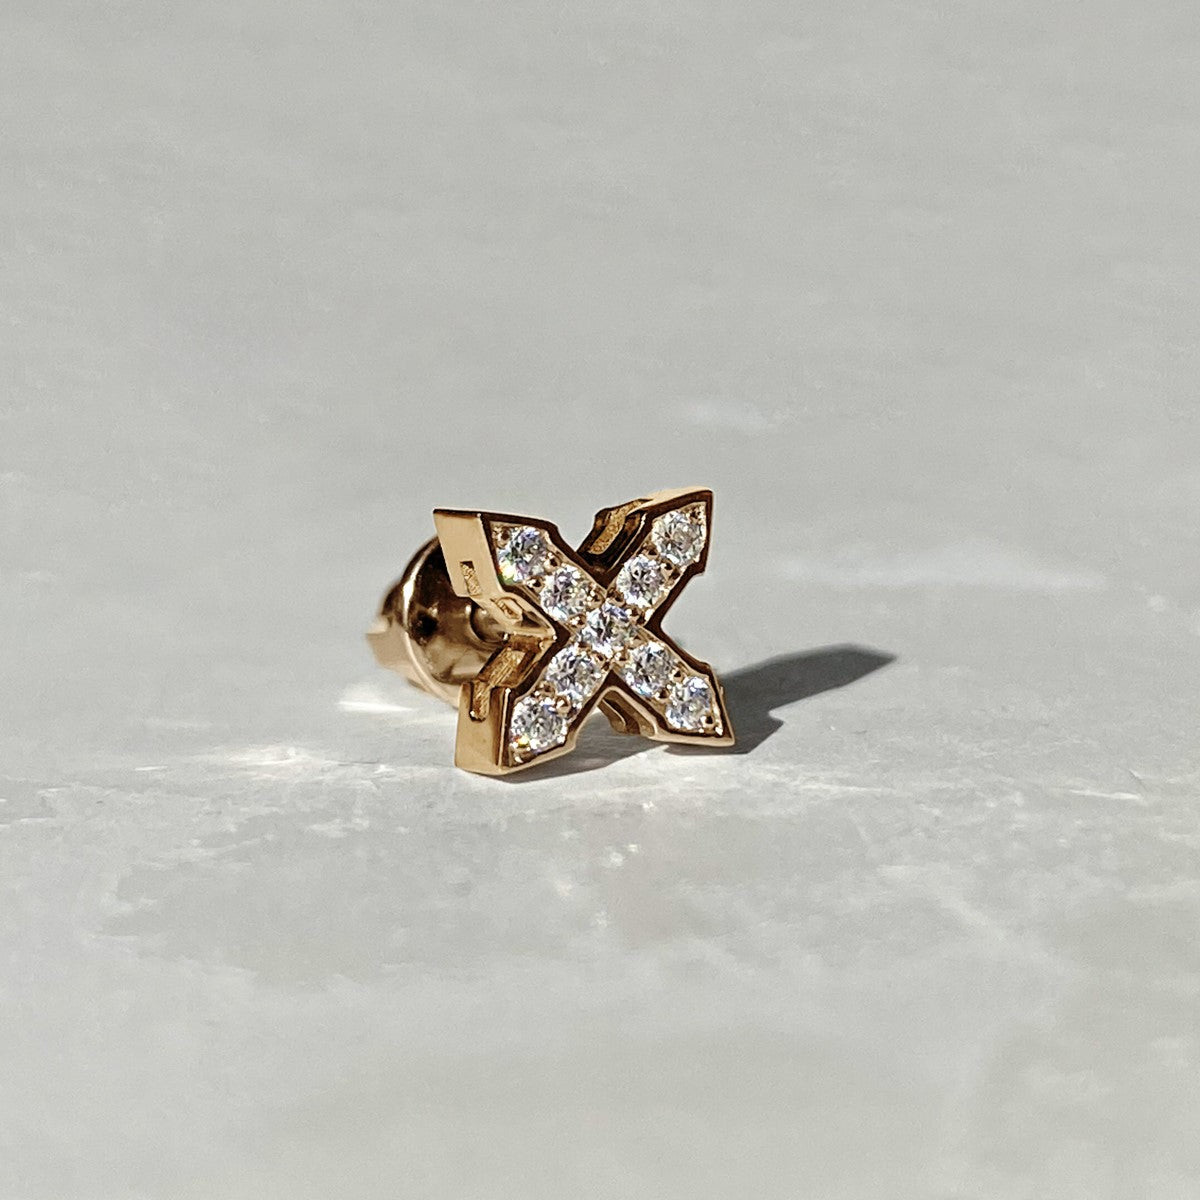 STUD MINI STAR "GLOW" WITH MOISSANITE / SOLID GOLD